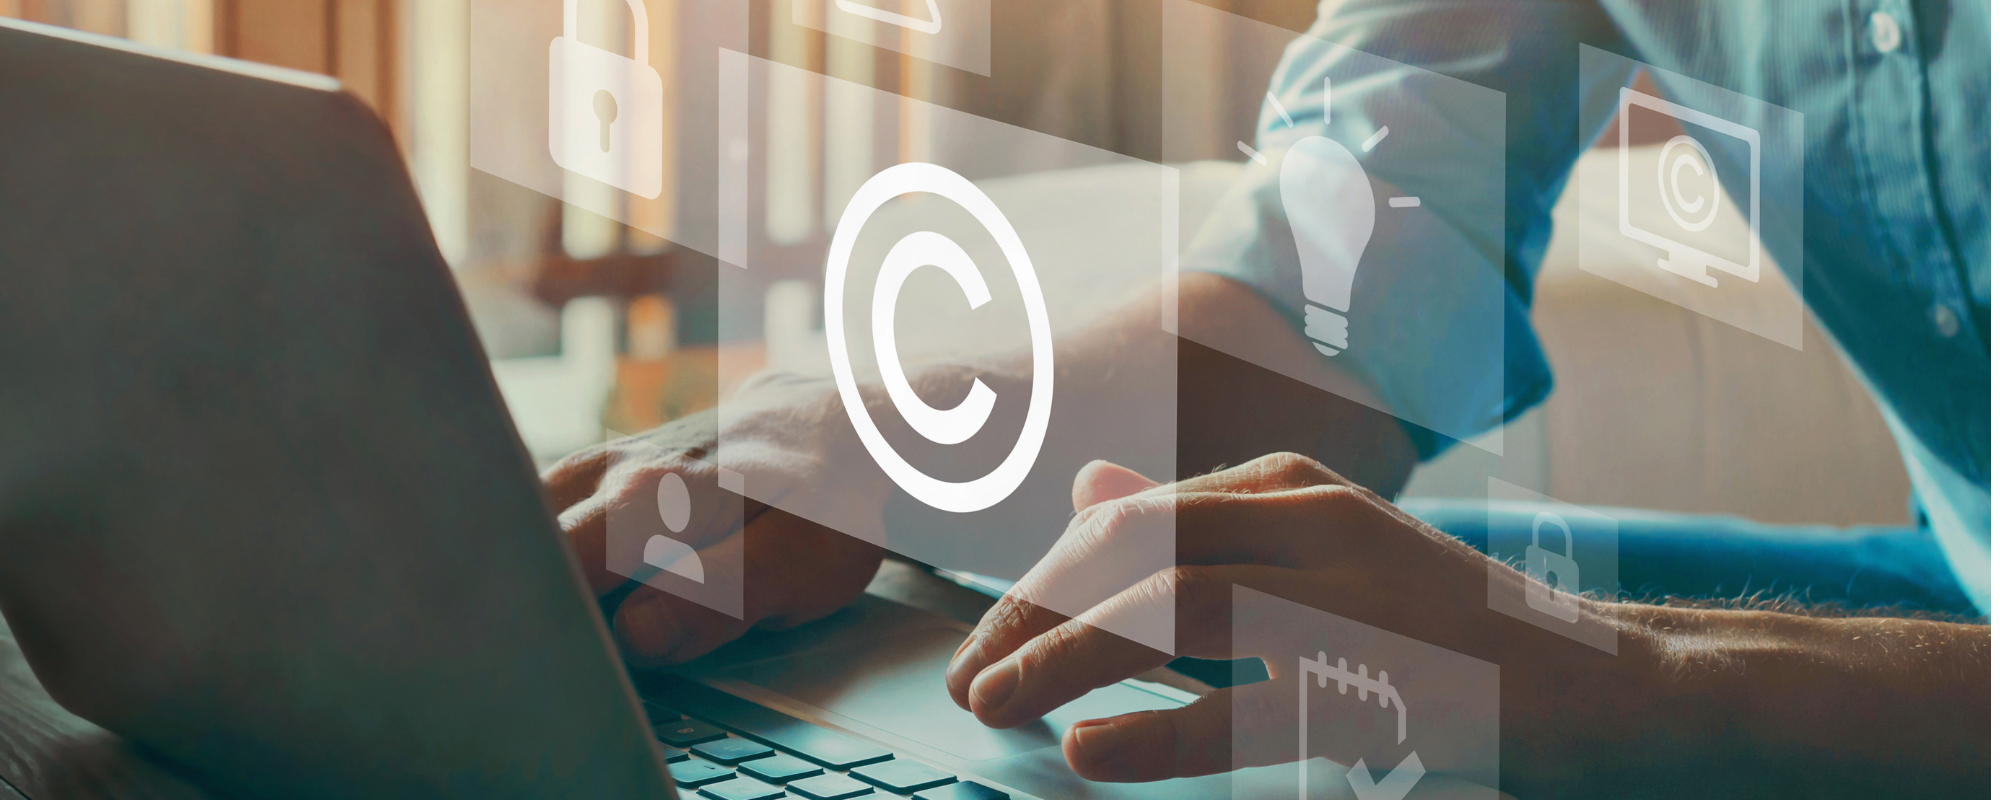 Online copyright protection